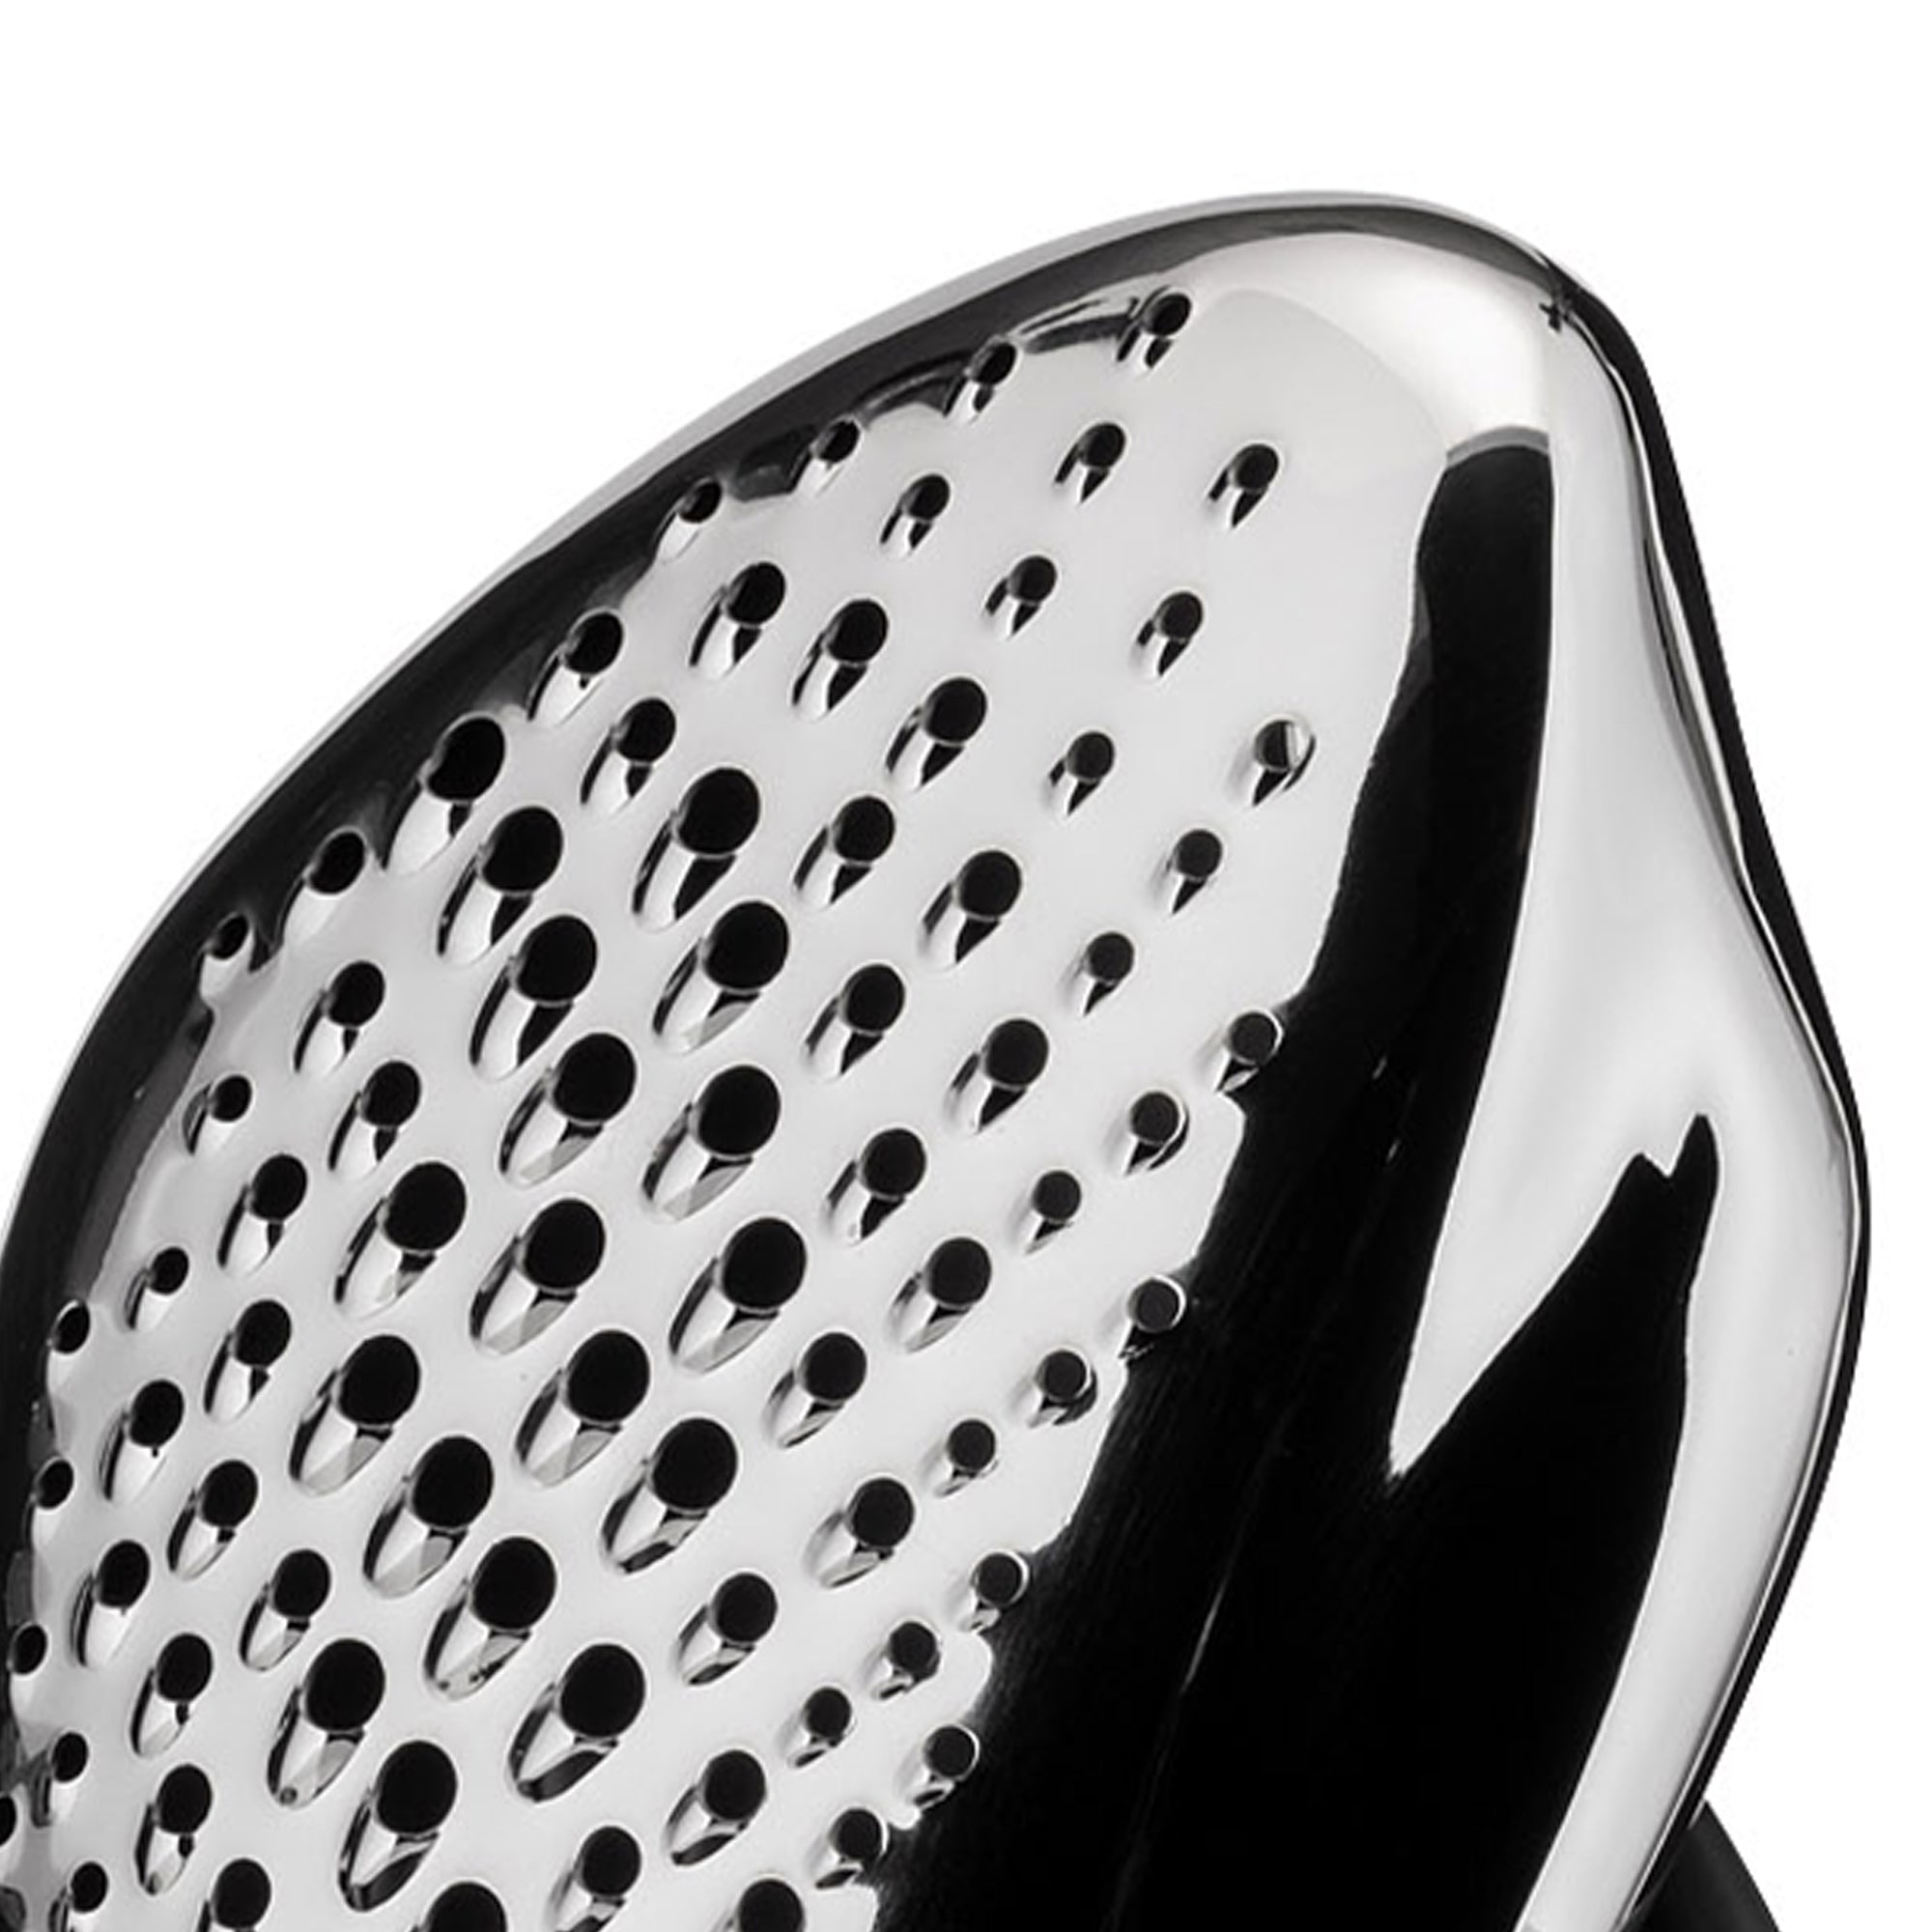 Alessi Forma Cheese Grater - Steel - Black. ZH03